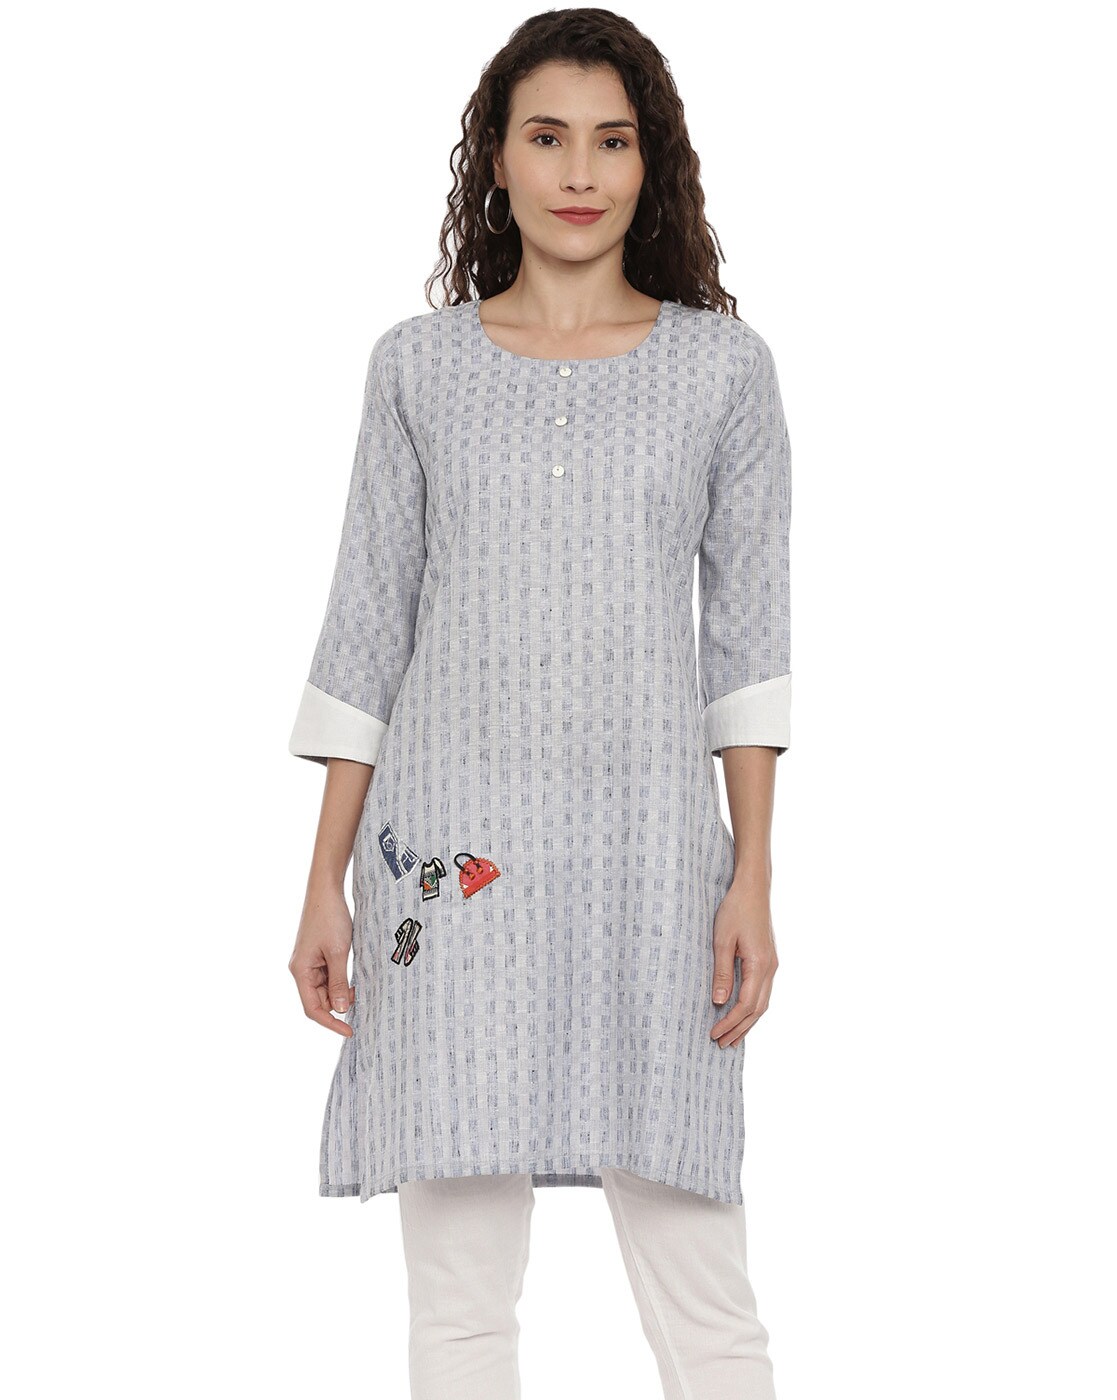 Neerus India - Looking for ethnic wear for casual occasions? Look no more  Shop from your nearest store or buy online. https://www.neerus.com/new-arrivals/newly-arrivals.html  #Neerus #NeerusIndia #Tunics #Kurtas #Kurti #KurtaSet #Bride #BridalWear ...